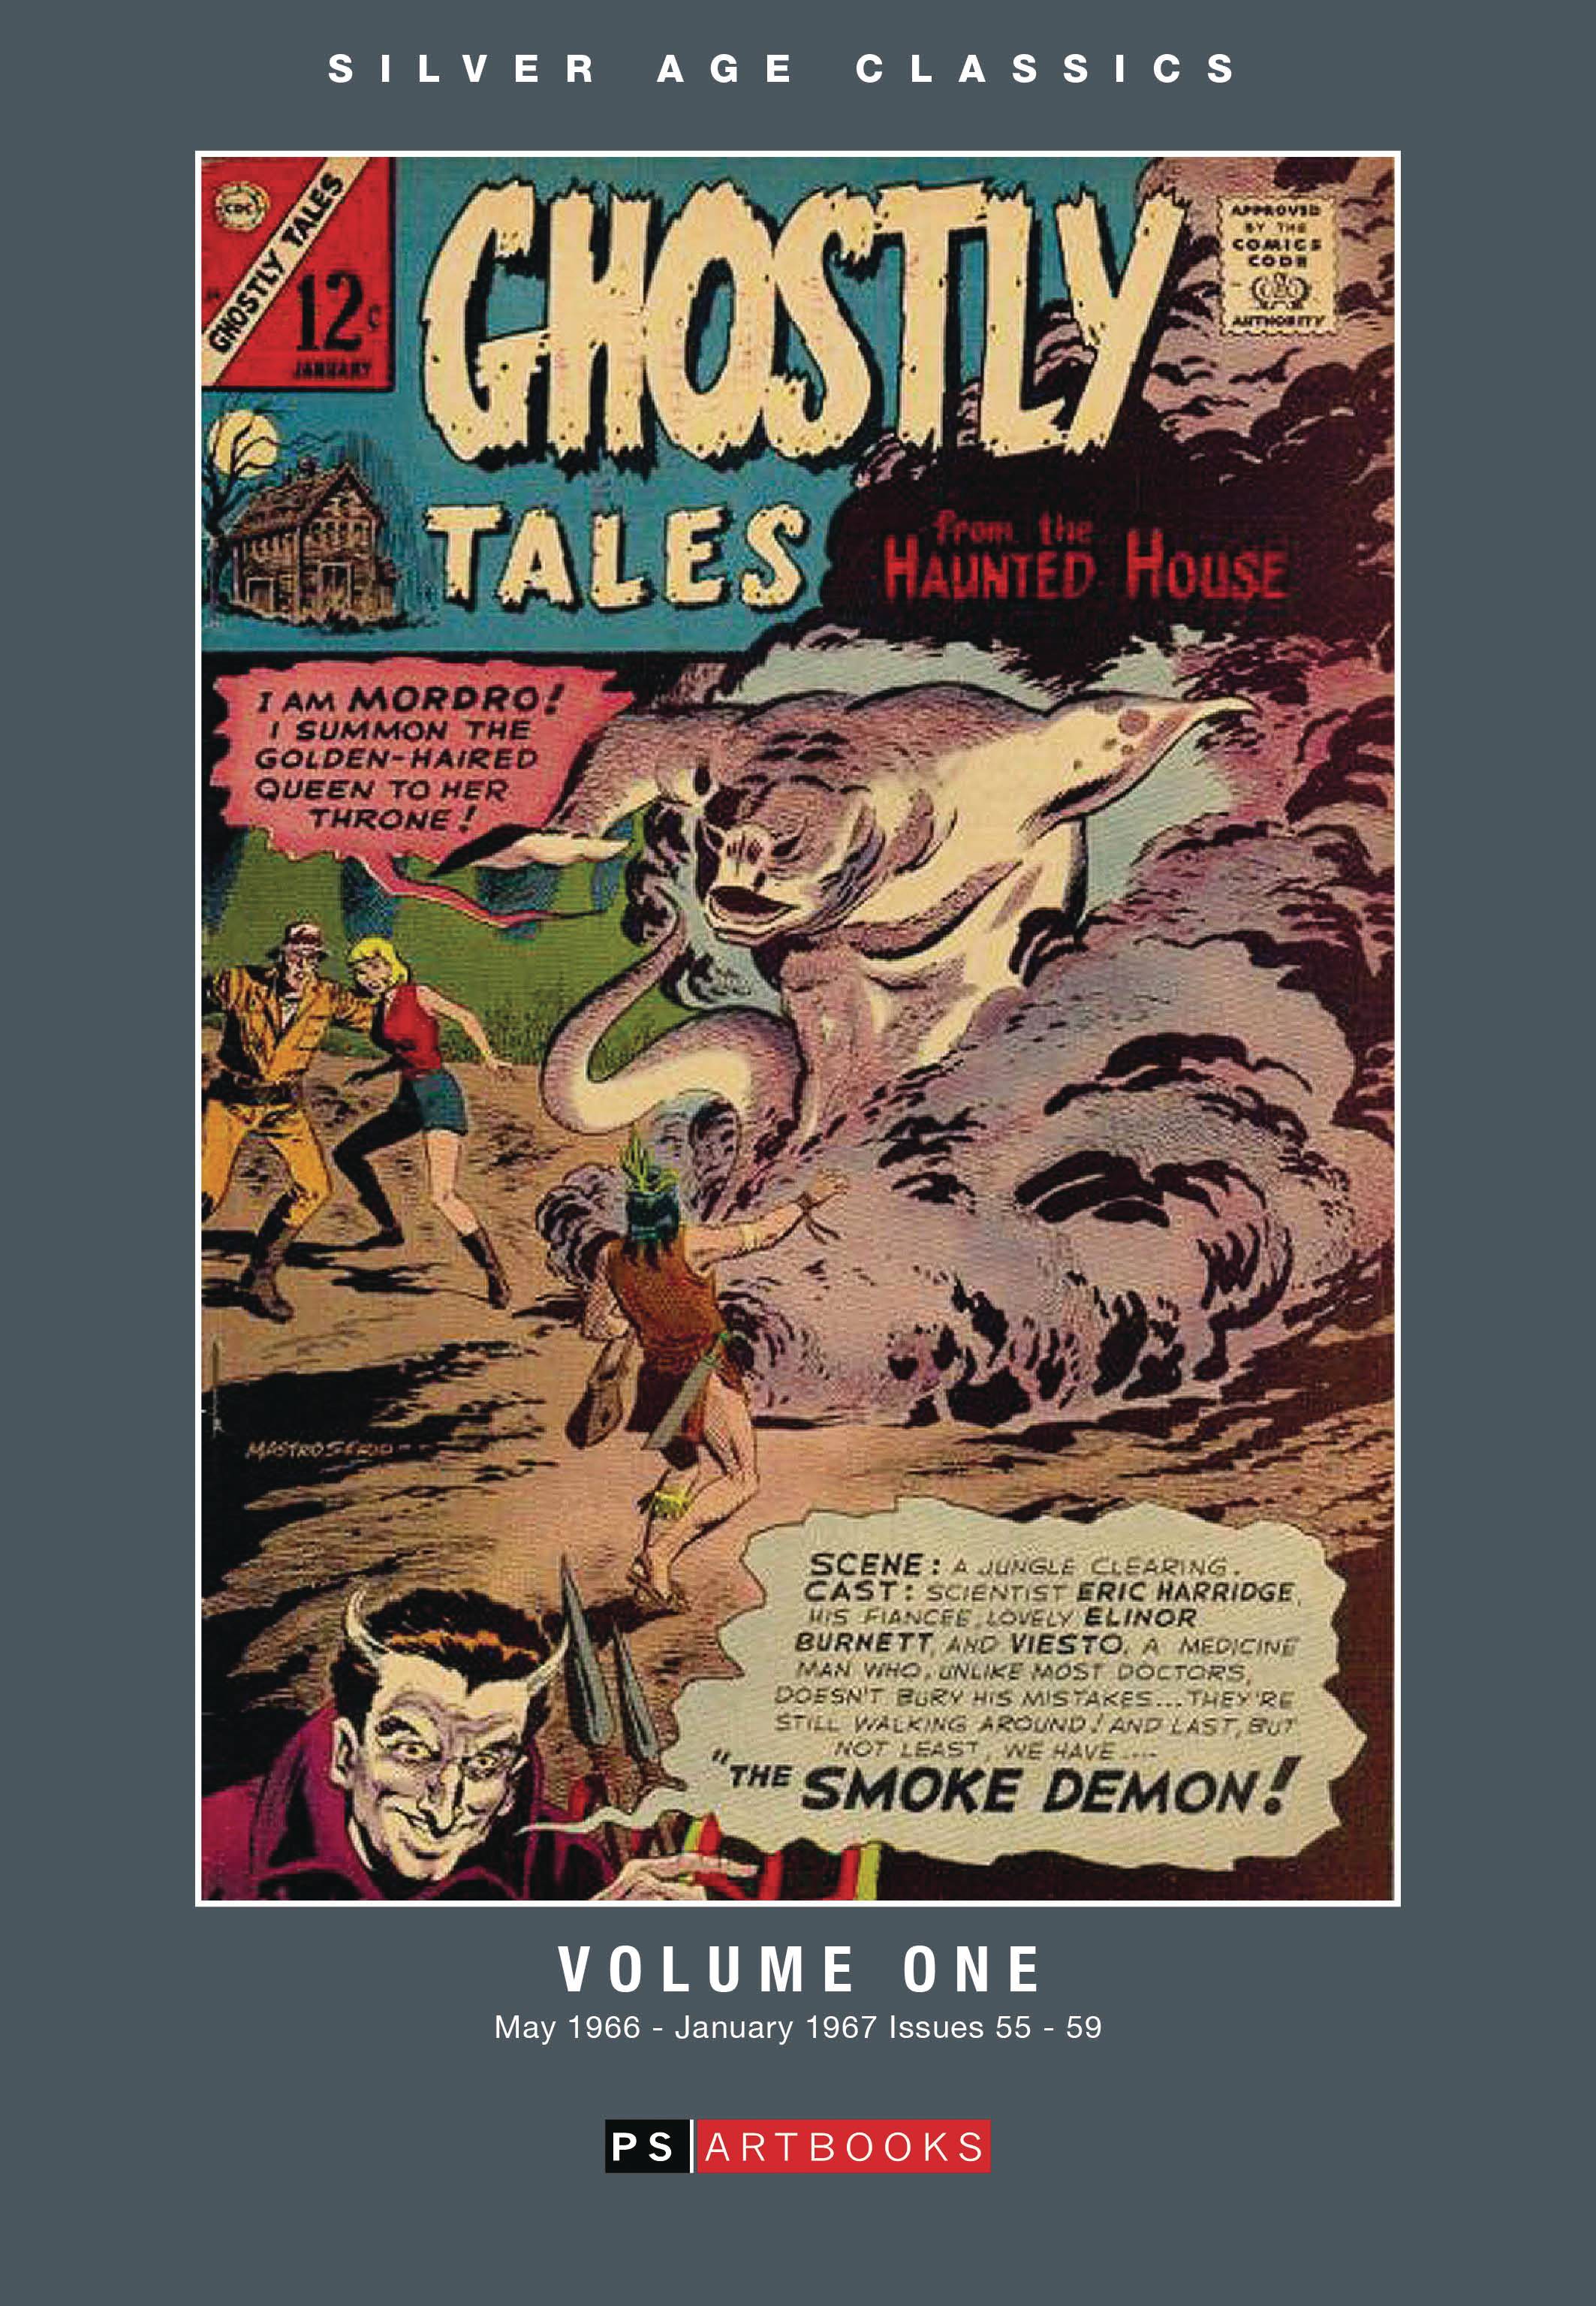 SILVER AGE CLASSICS GHOSTLY TALES HC 01